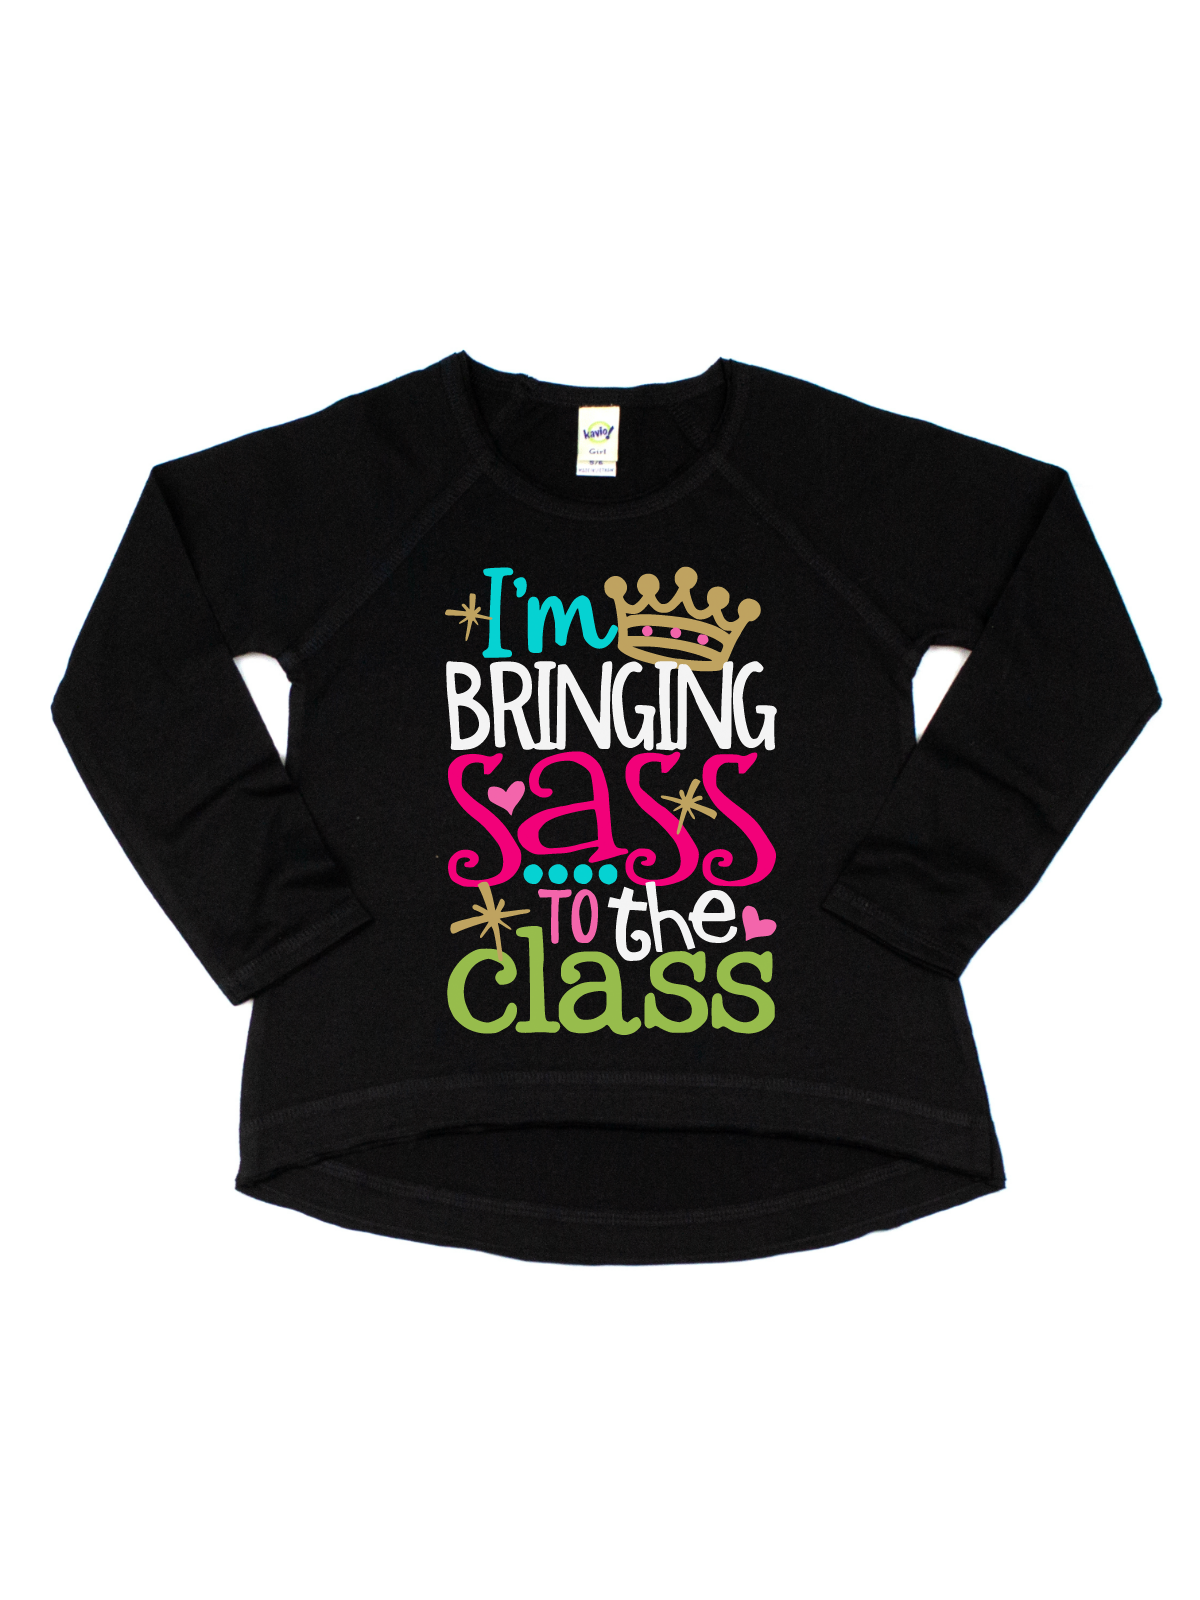 I'm Bringing Sass to the Class Girls Long Sleeve Shirt in Black